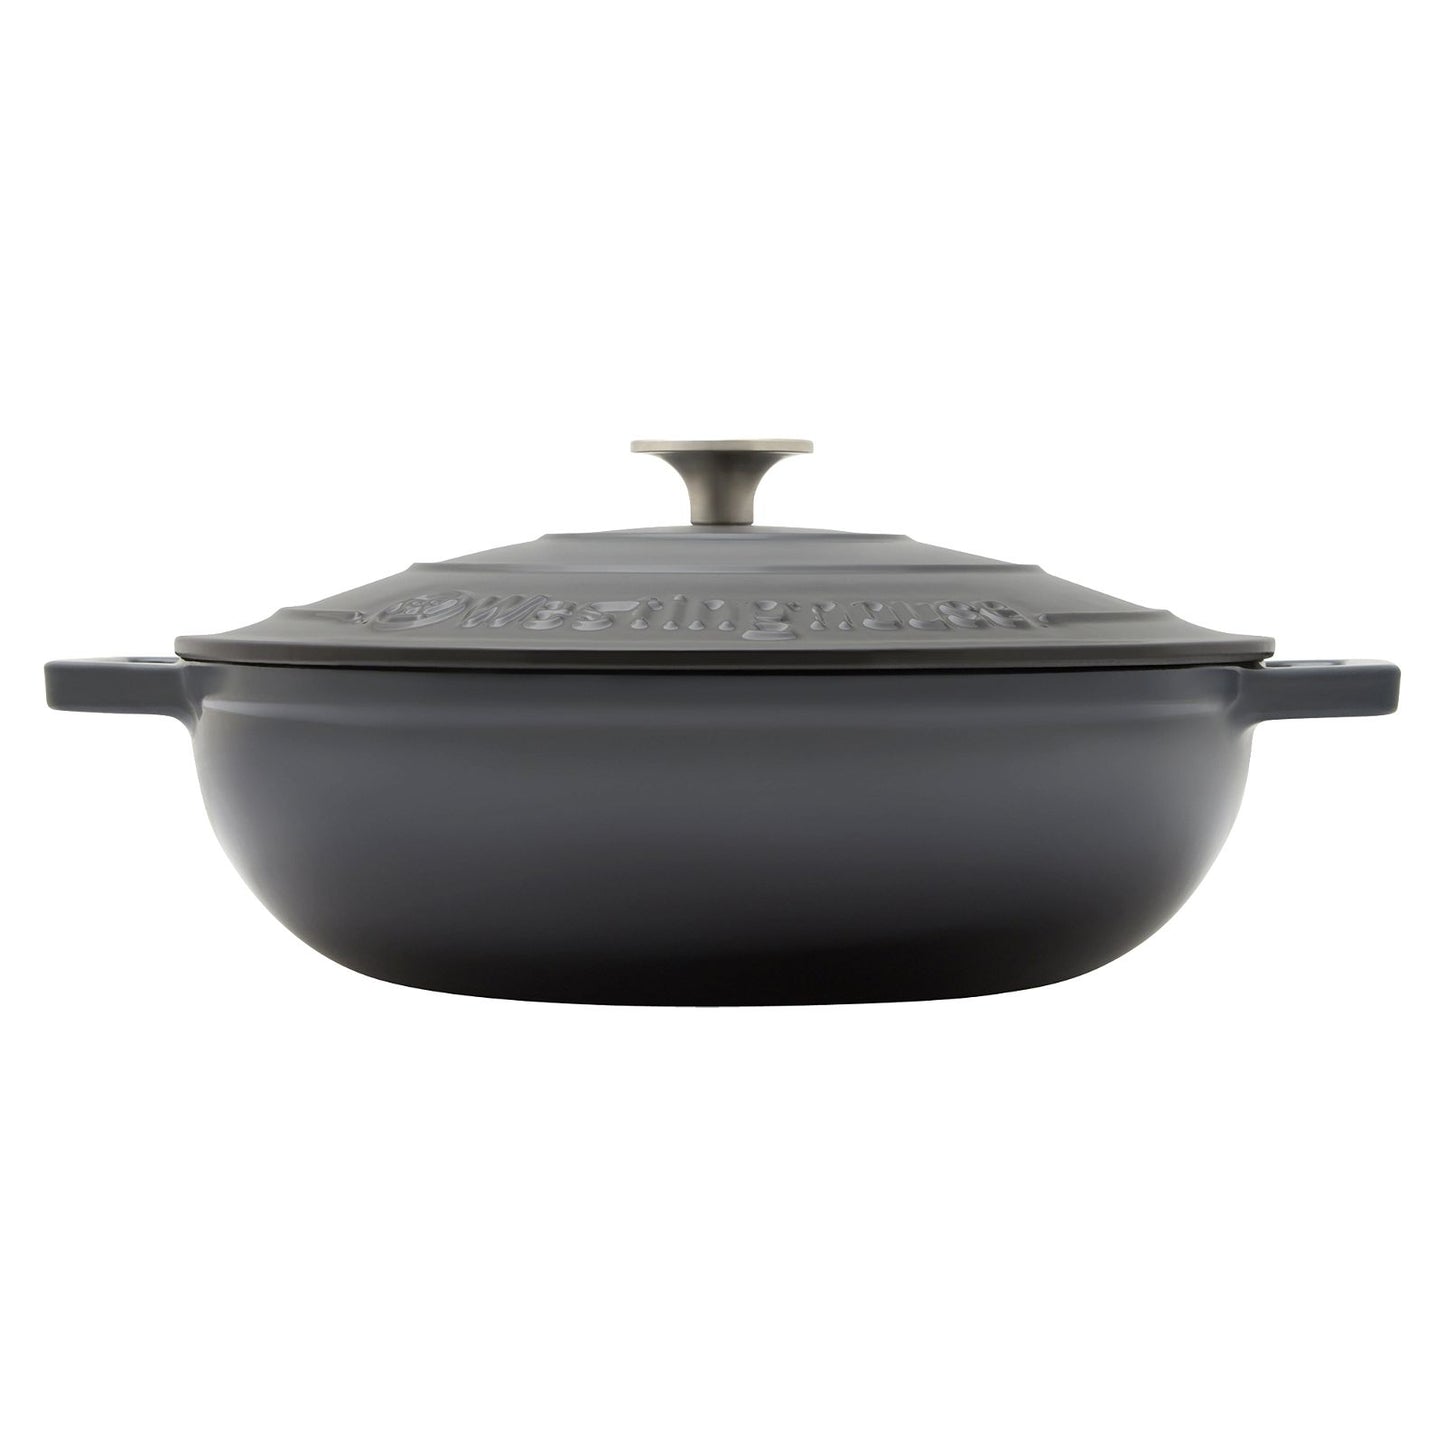 Westinghouse Cast Iron Pot 30cm Shallow Grey-#product_category#- Distributed by:  under license